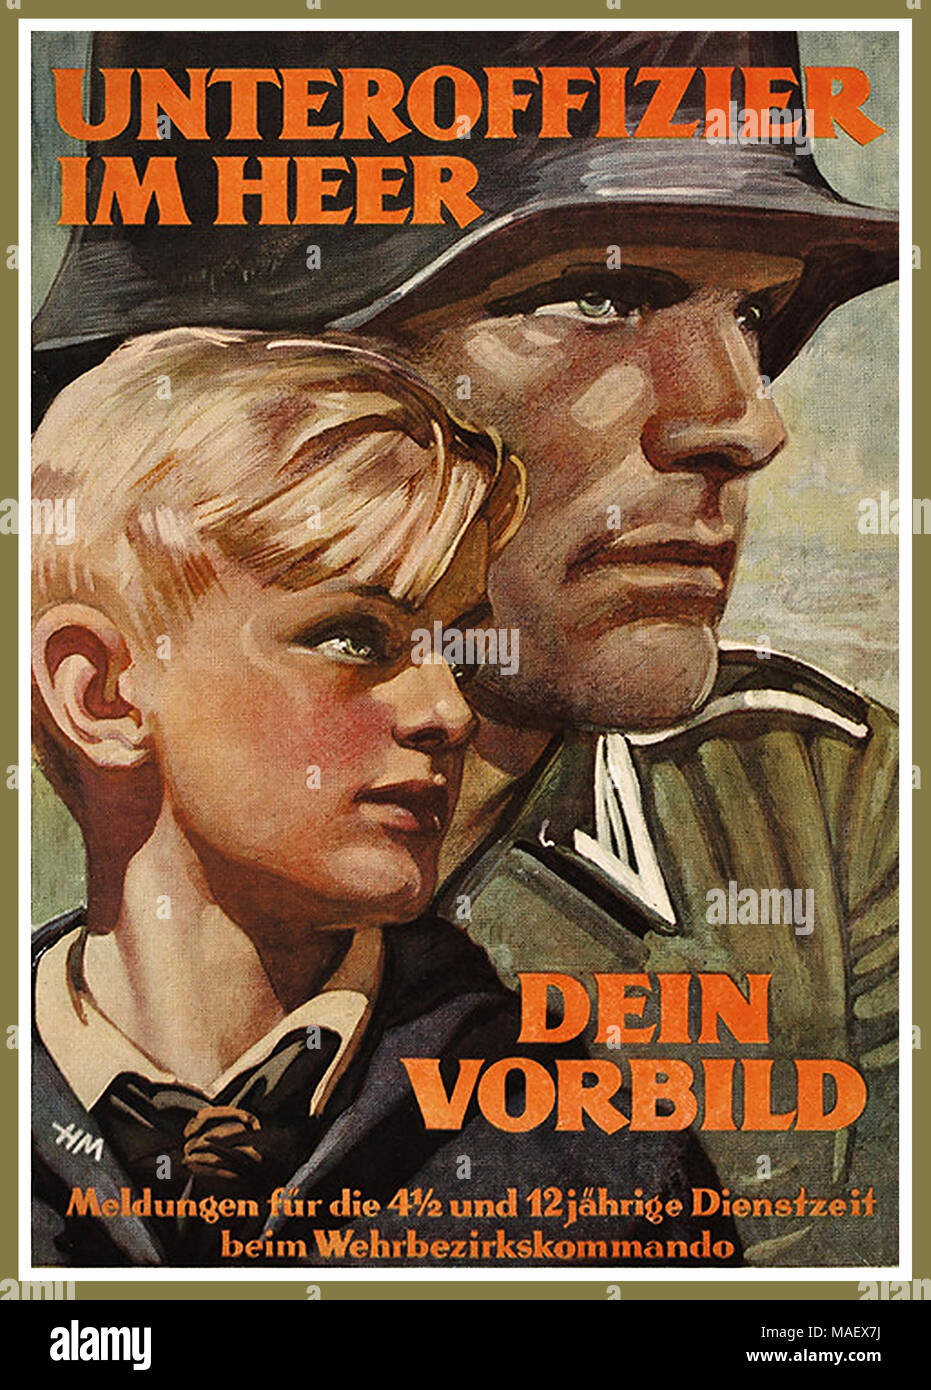 WW2 Nazi Propaganda Wehrmacht Recruitment Recruiting Poster for Hitler Youth 1943 “Be a Non-Commissioned Officer In The Army. Follow his example”. .’Message to our Hitler Youth aged between 4 and 12 years’ Stock Photo